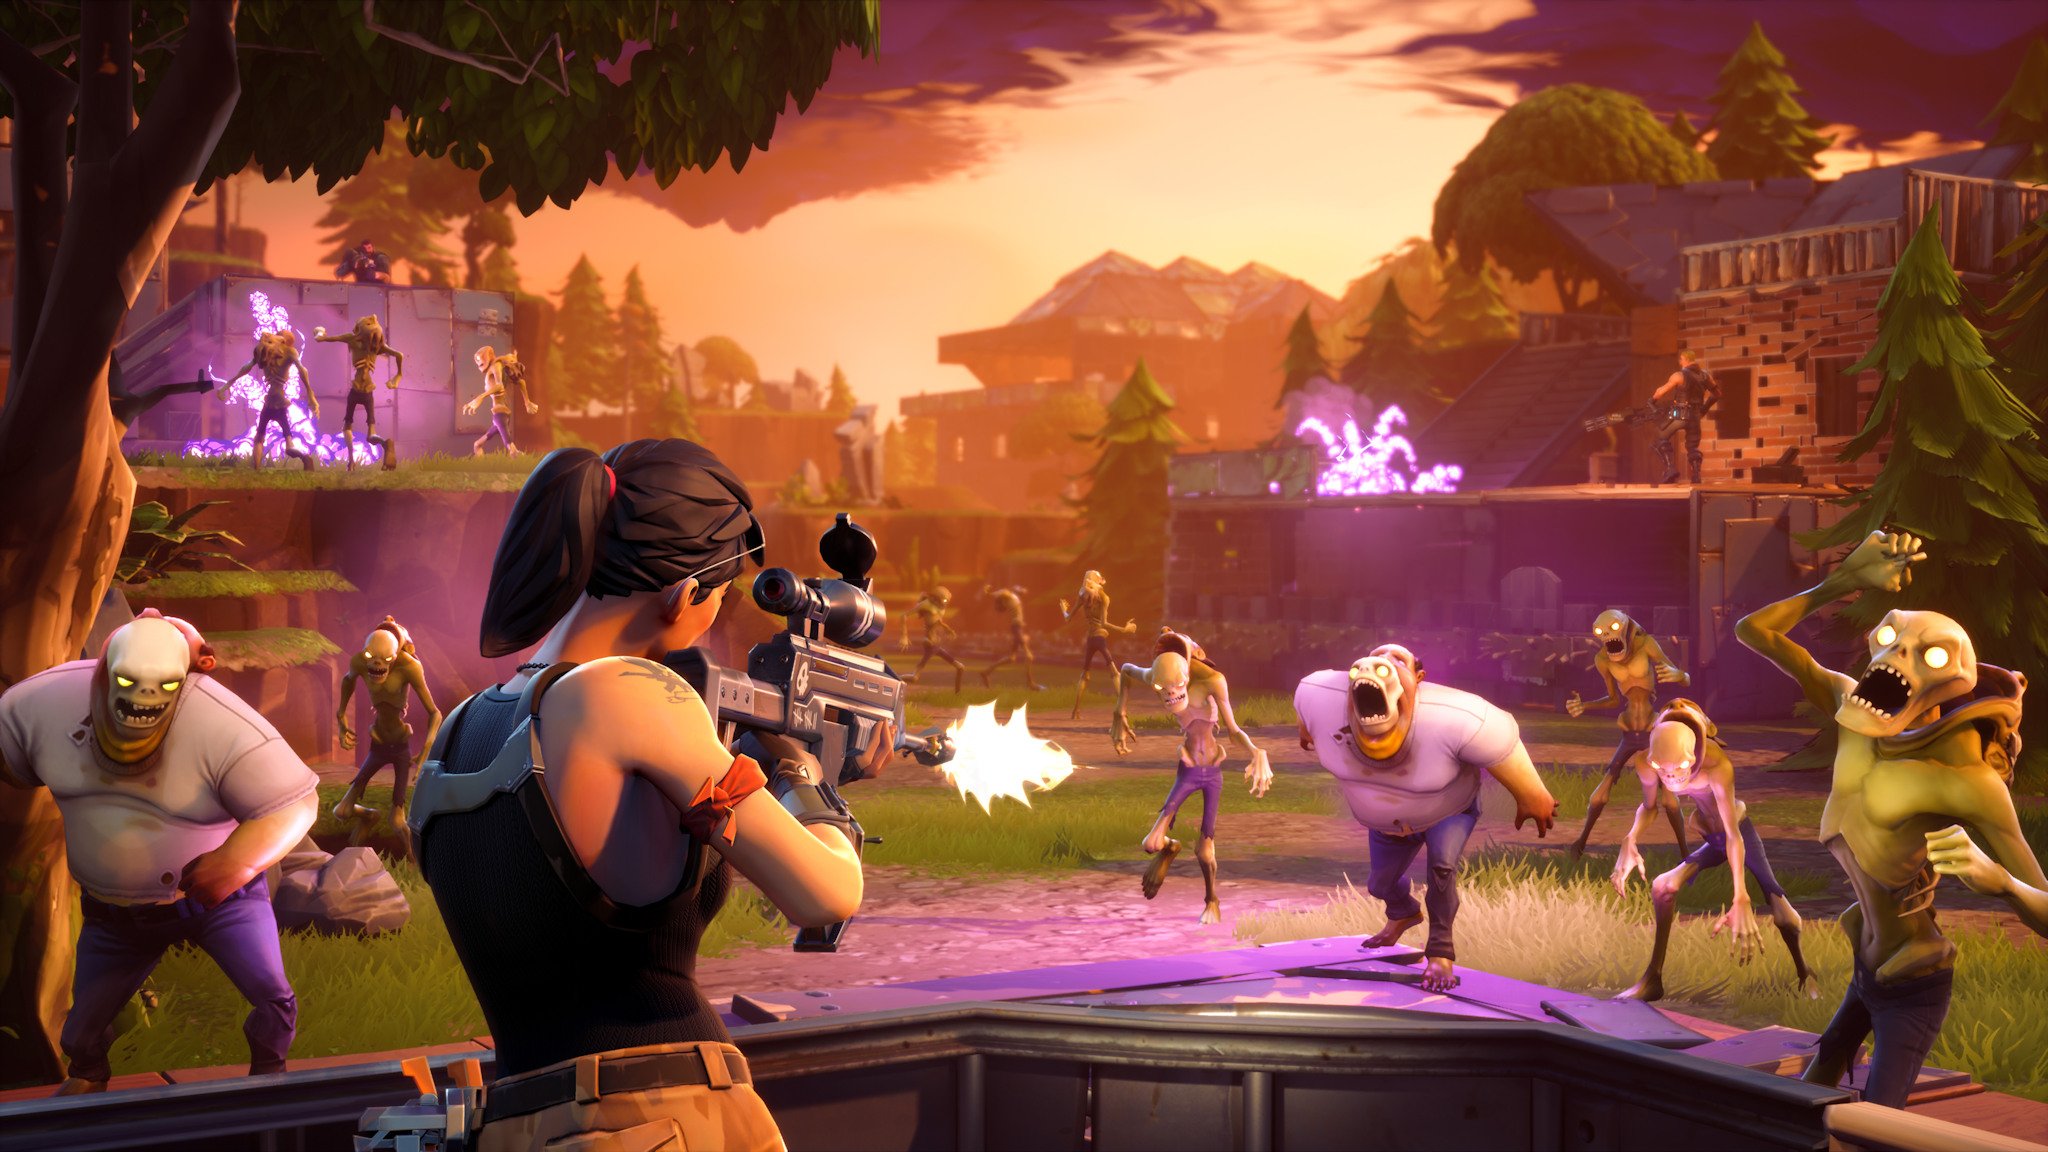 Fortnite for Xbox One gets cross-play with PC, Mac, and iOS